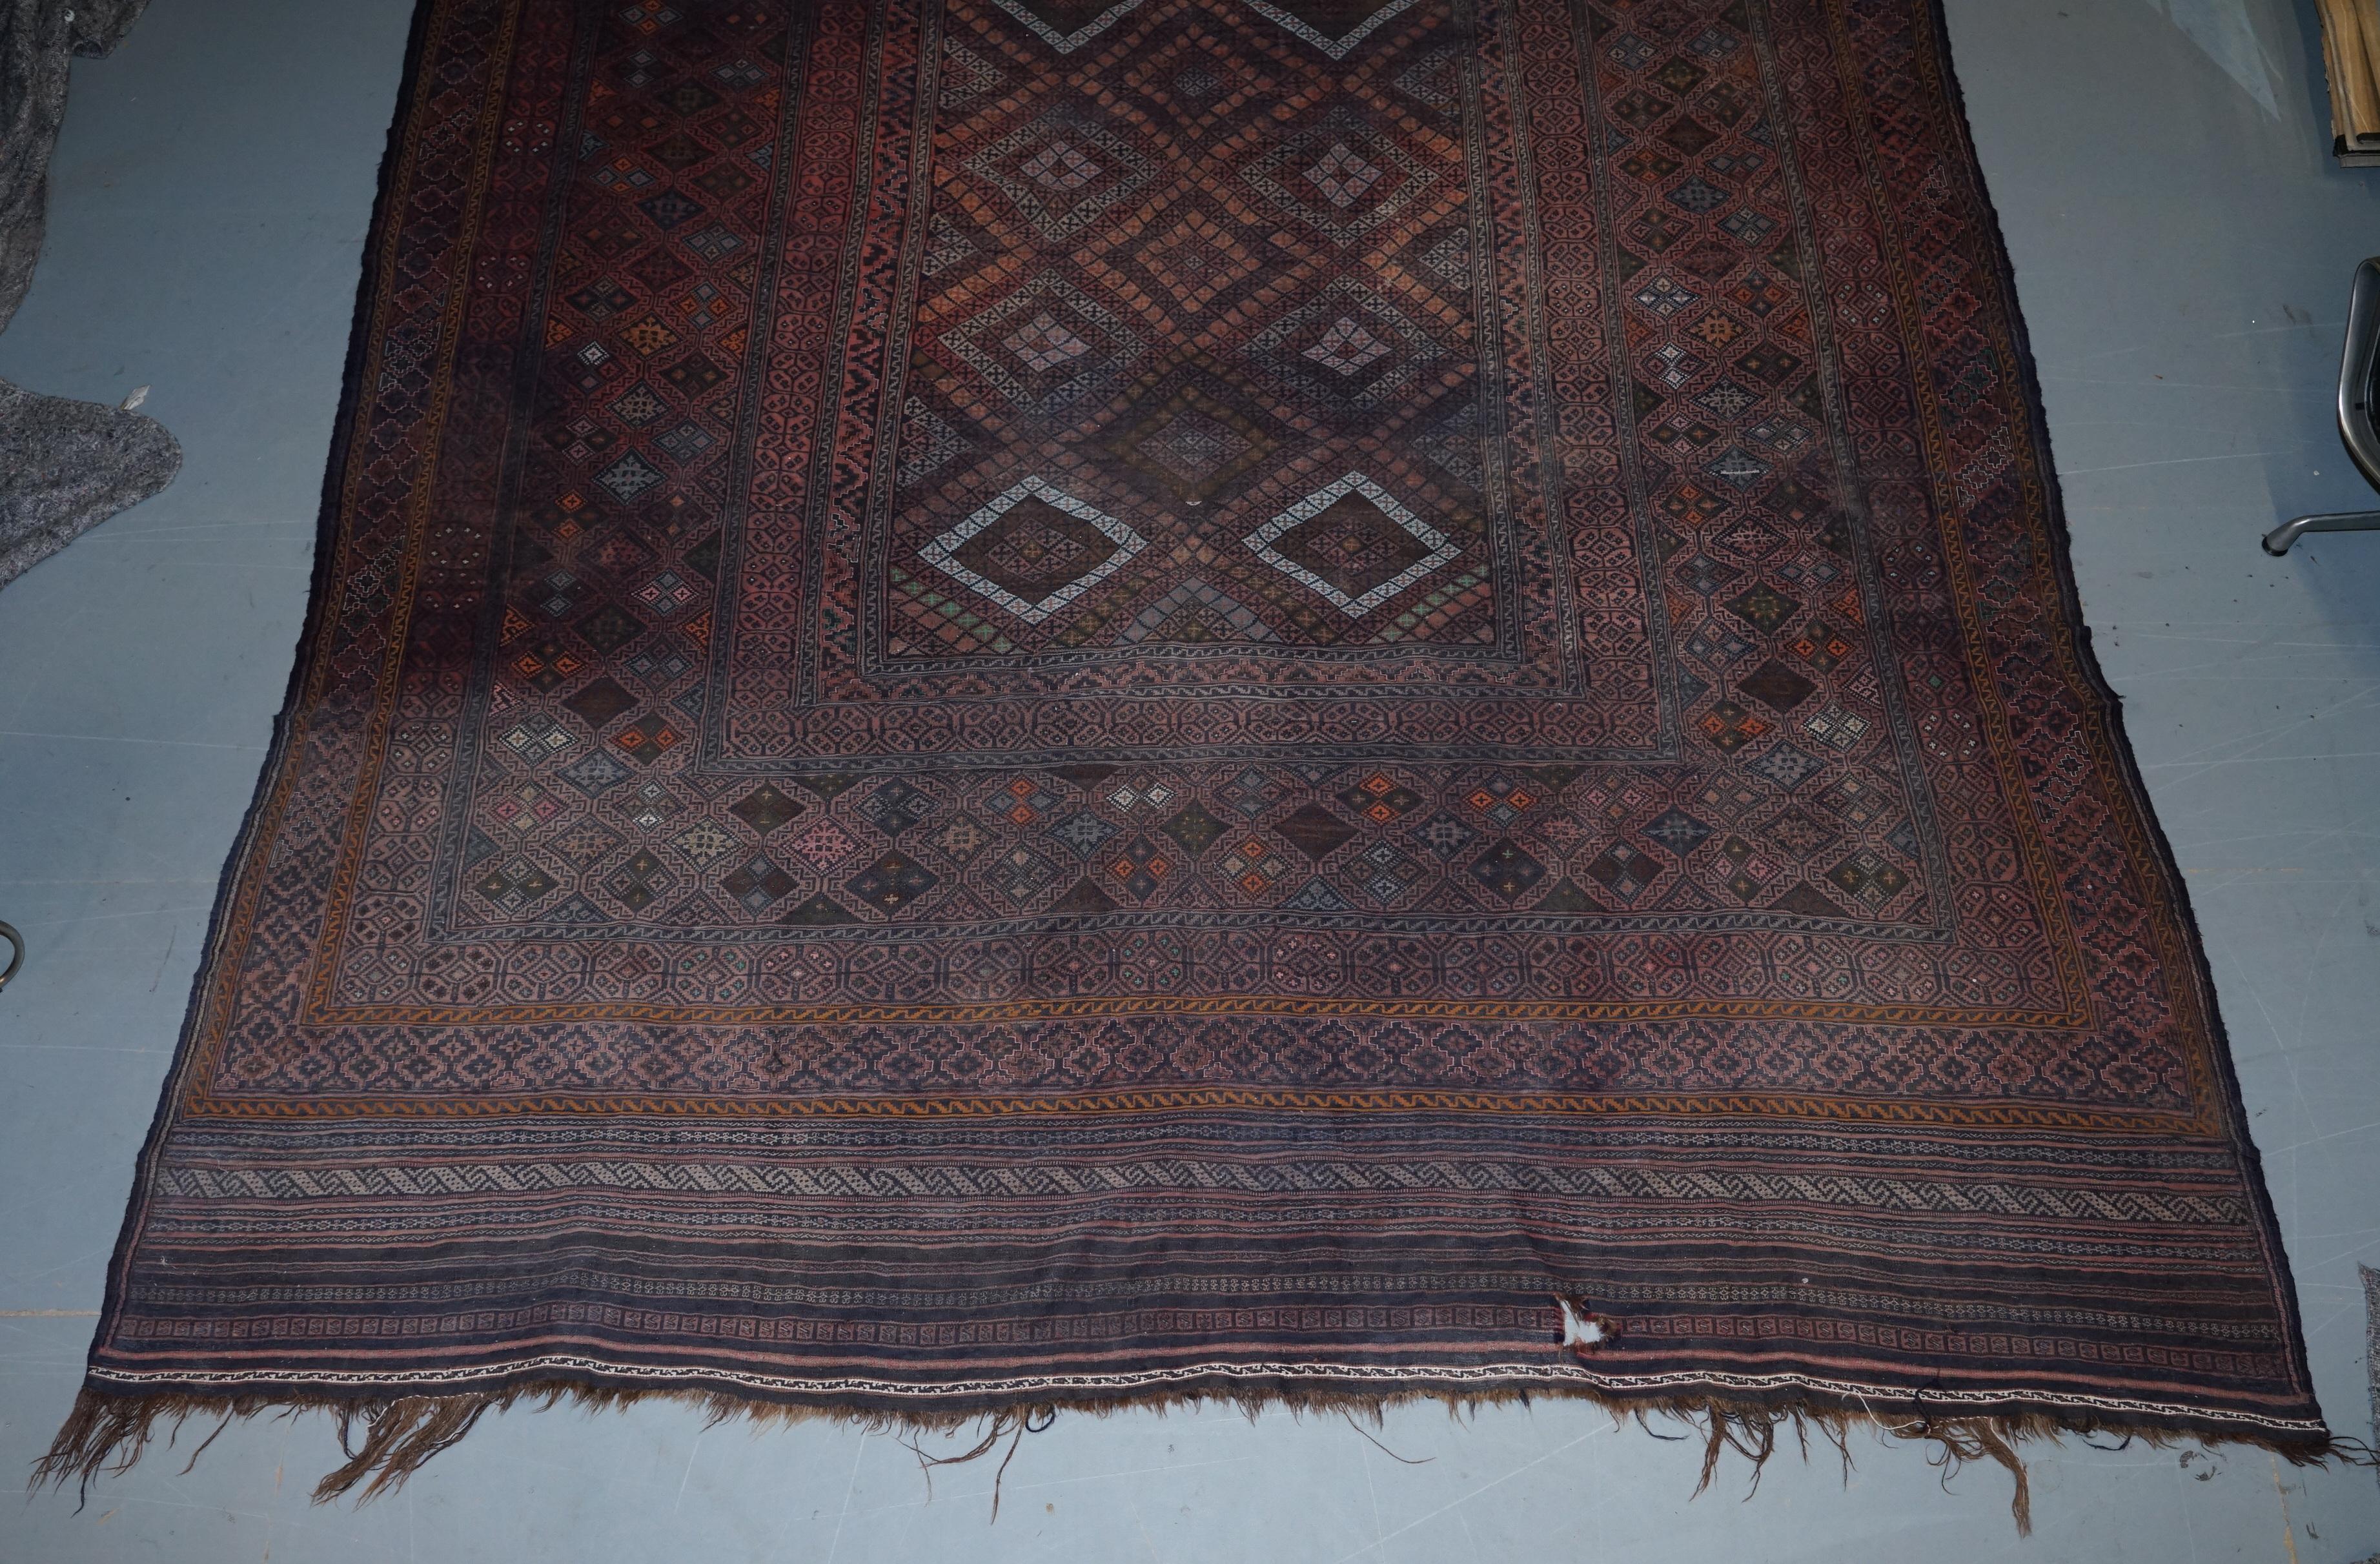 We are delighted to offer for sale this original 19th century, handwoven and knotted Kilim rug

The one is a very large Kilim, its mostly purples and is a 19th century, hand knotted and woven example, have a look at the picture of the back of the